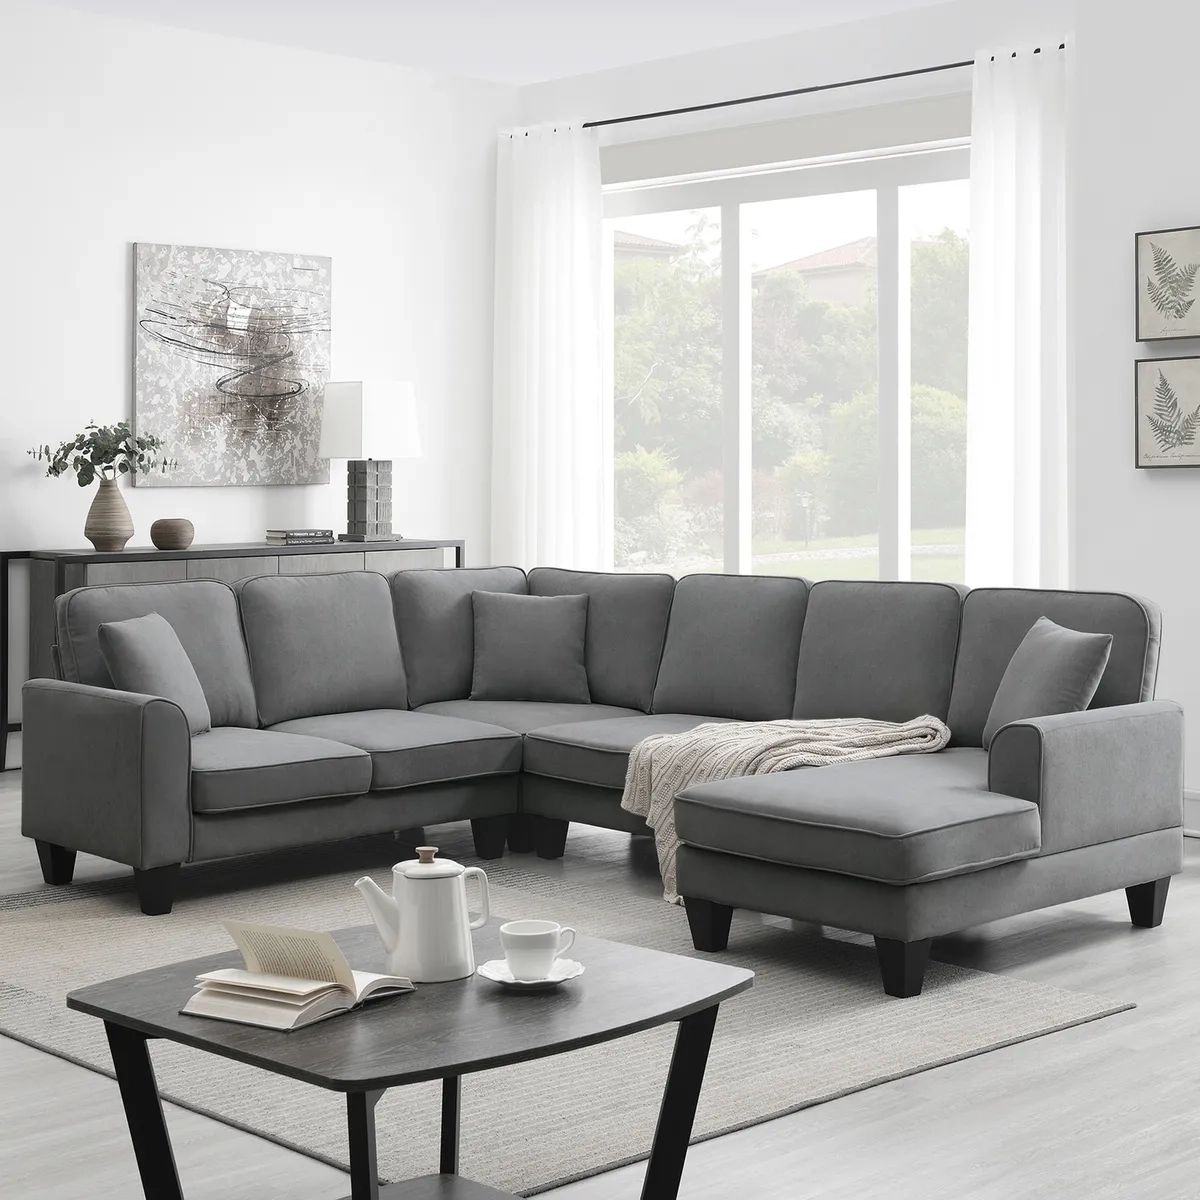 7 Seat Sectional Sofa Set Modern Furniture U Shape Couch Living Room, 3  Pillow | Ebay For Modern U Shaped Sectional Couch Sets (View 2 of 15)